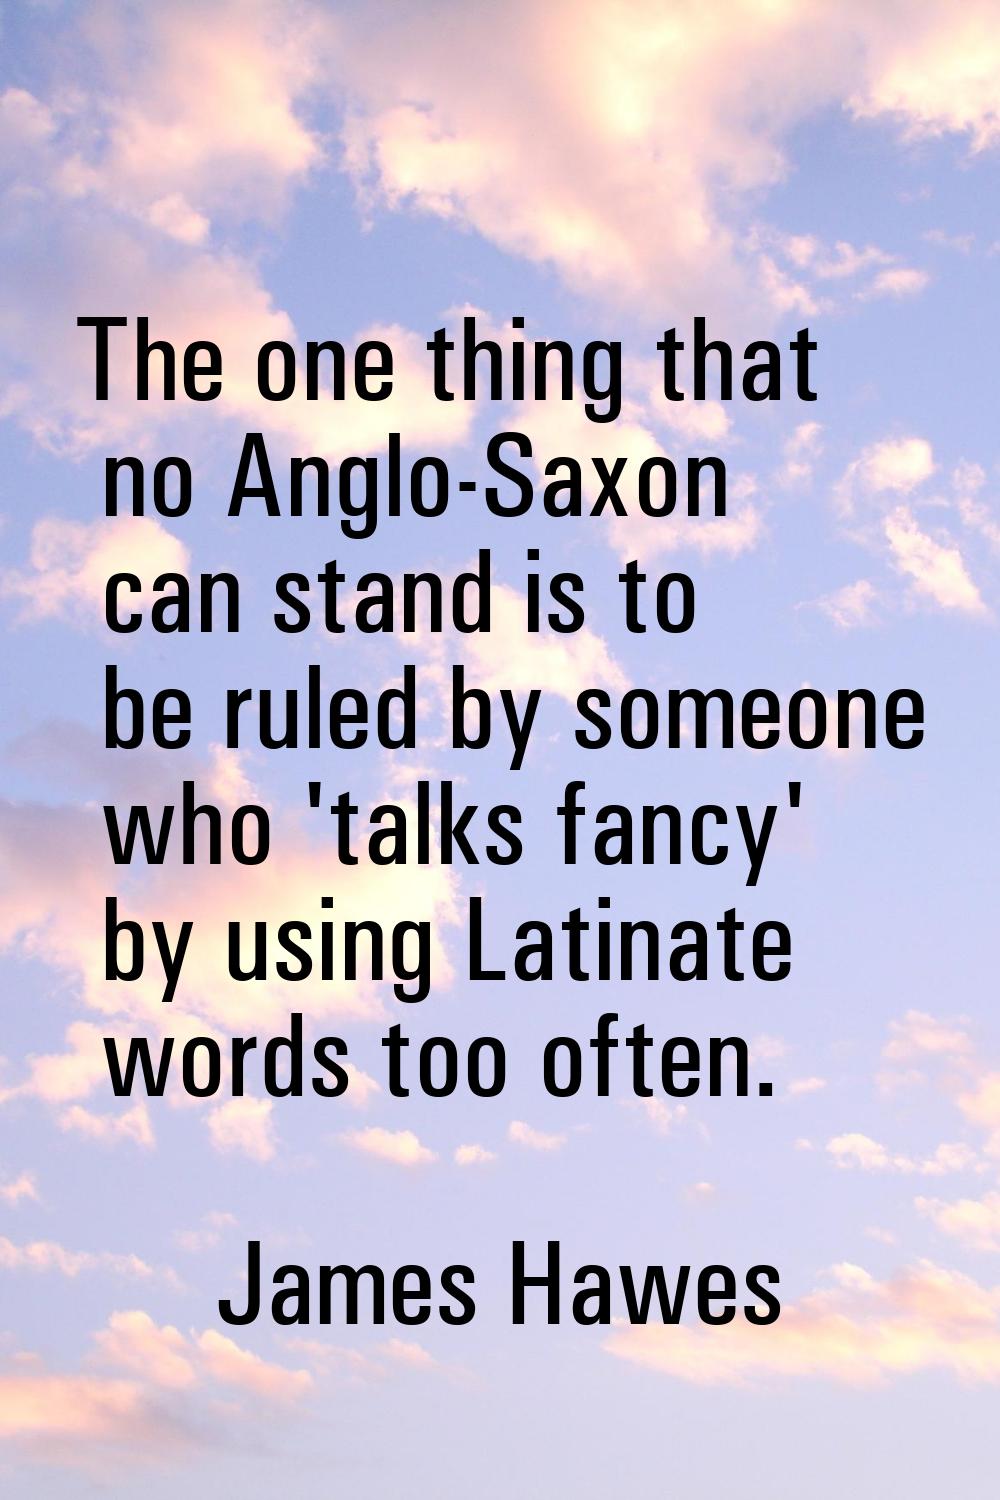 The one thing that no Anglo-Saxon can stand is to be ruled by someone who 'talks fancy' by using La